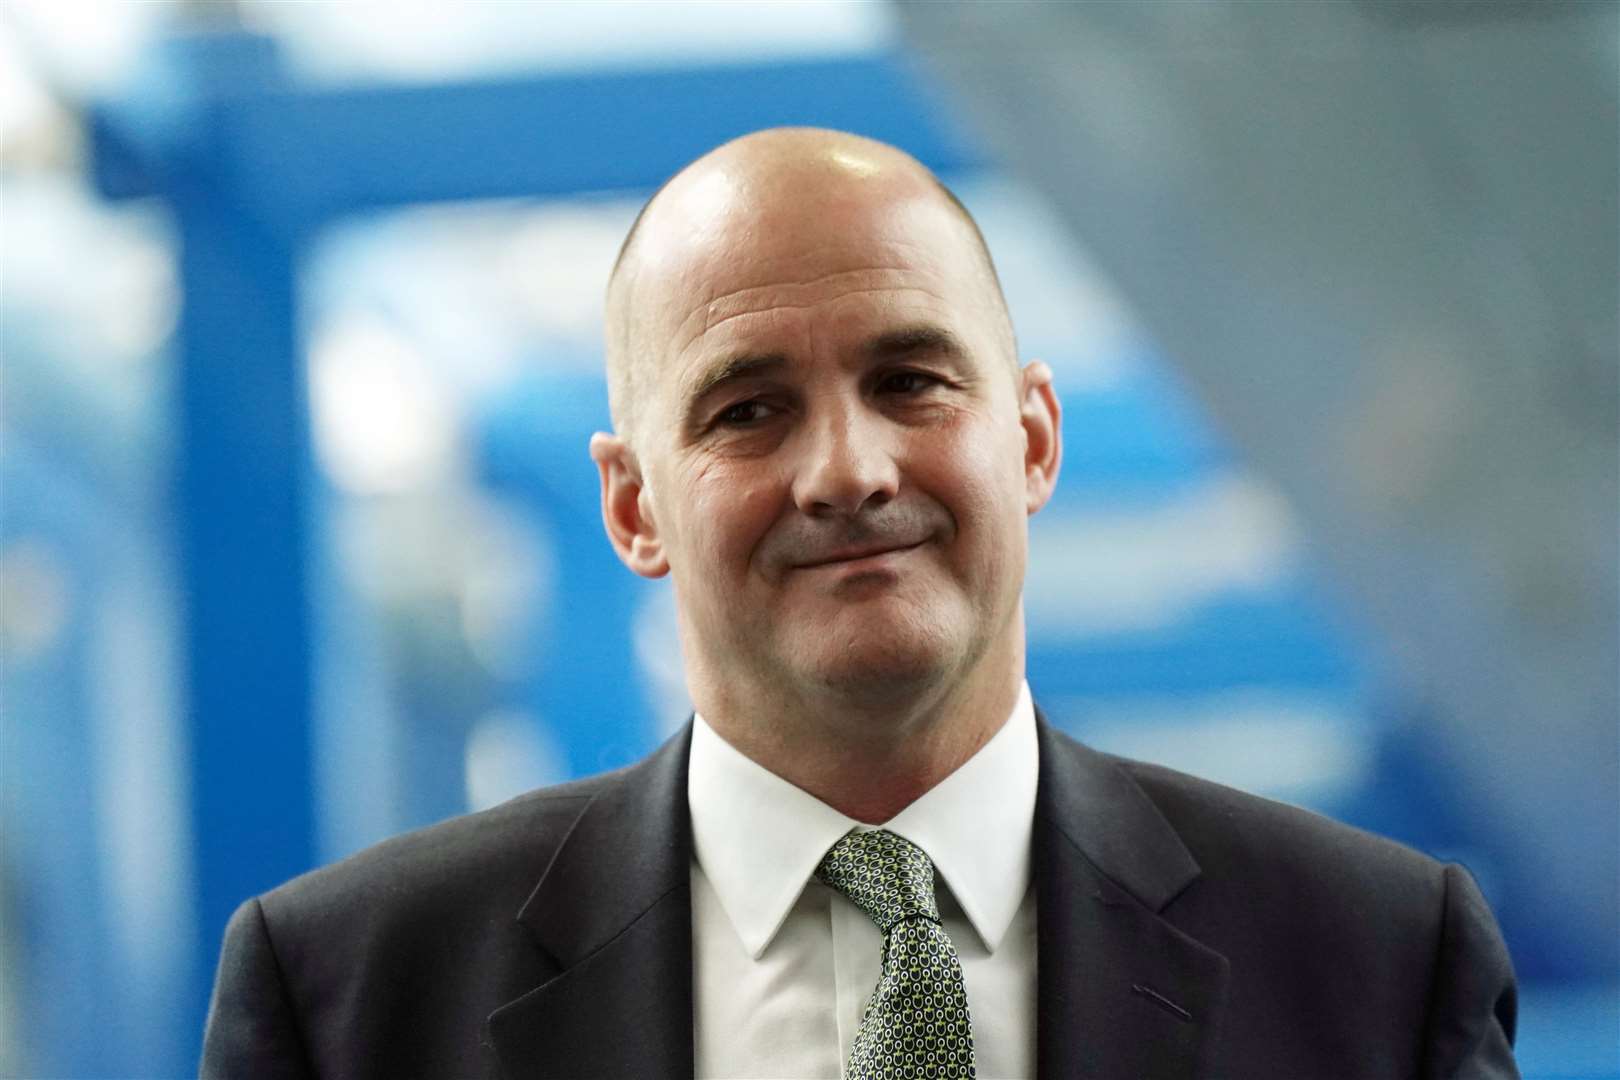 Senior Tory MP Sir Jake Berry has said it is “unsustainable” for Mr Zahawi to remain in position (Aaron Chown/PA)